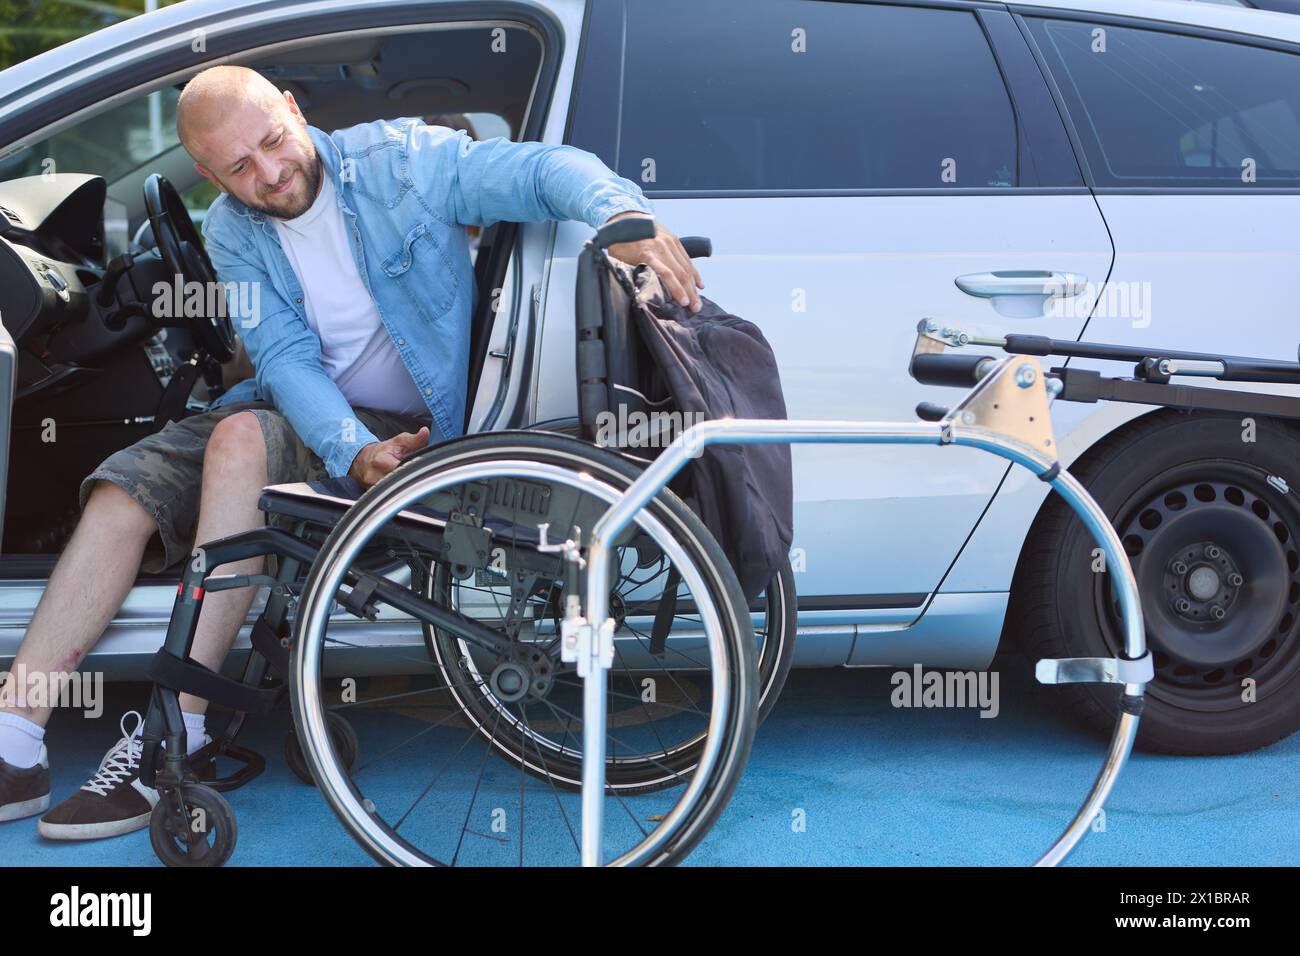 A person with a disability is seen transferring from his car seat to his wheelchair, demonstrating independence and ease with mobility aids. Stock Photo